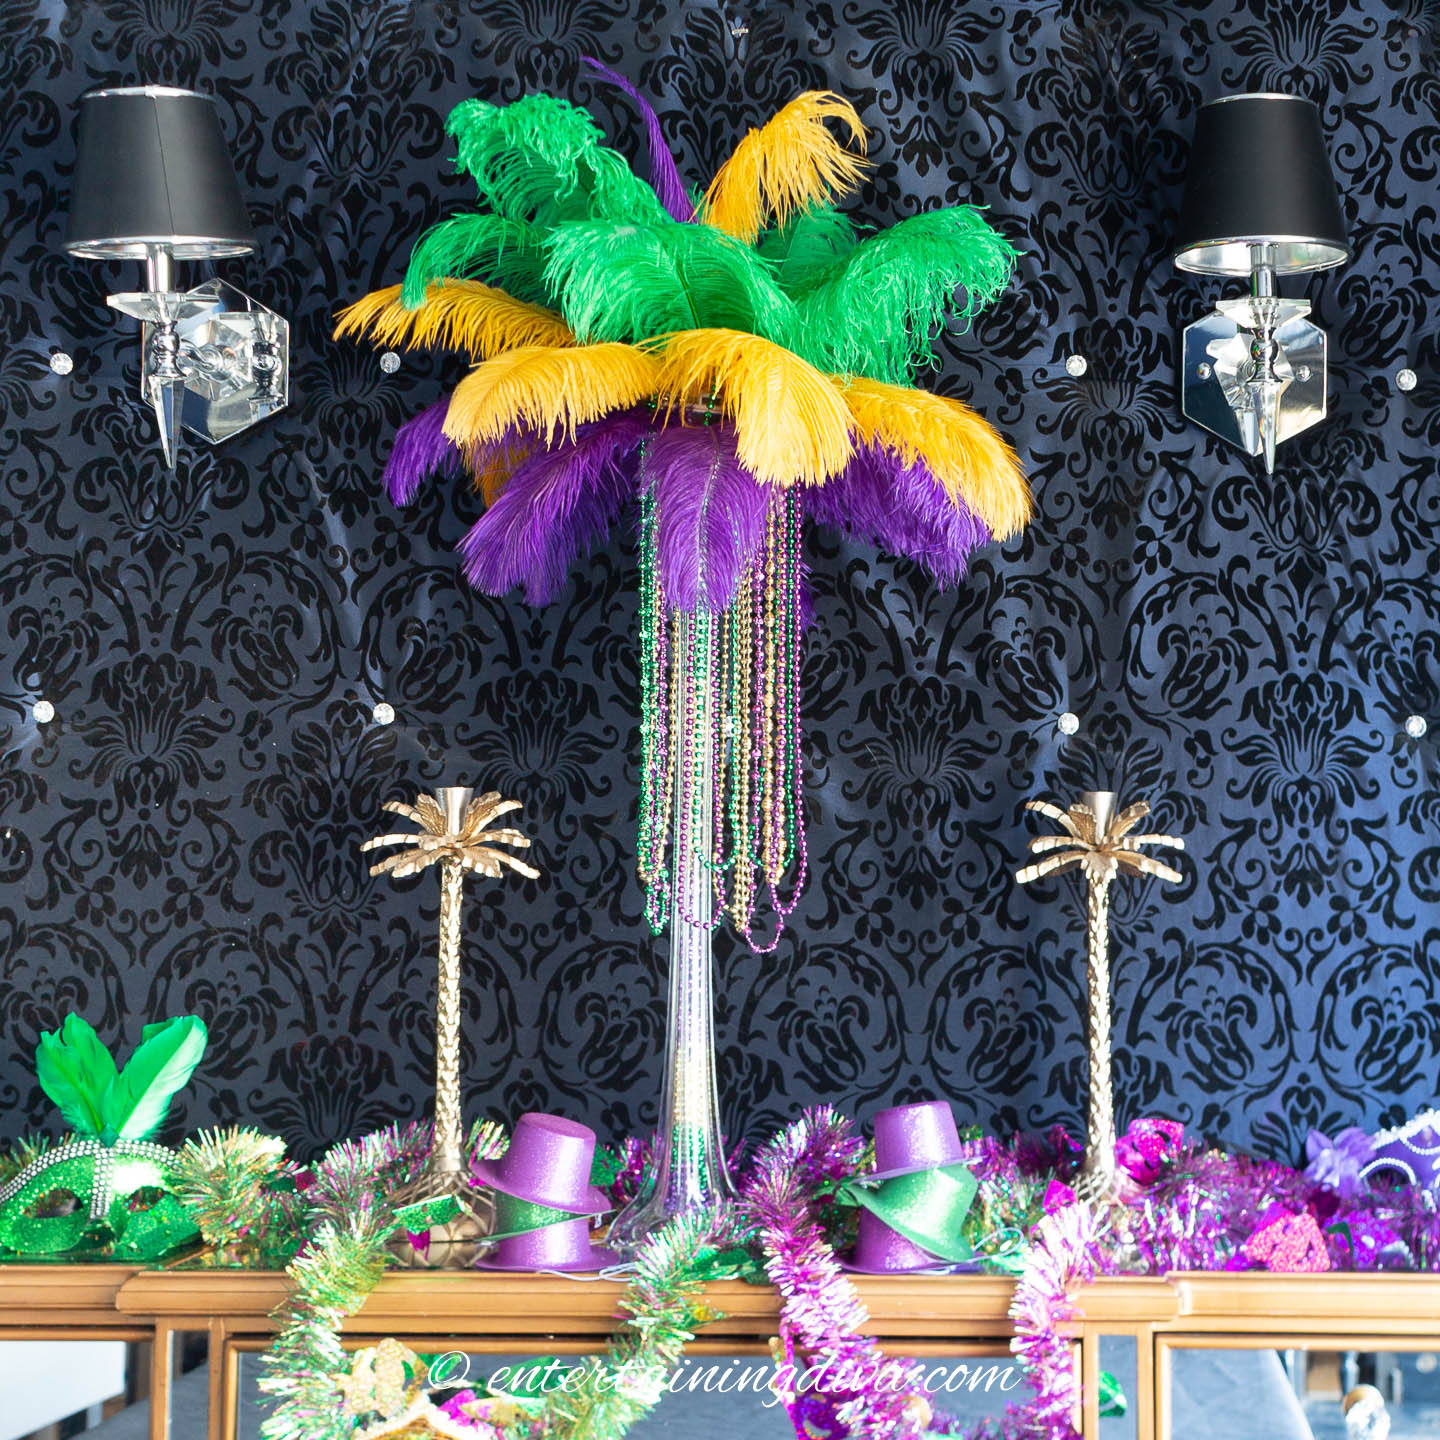 Mardi Gras party decorations made of purple, green and gold feather centerpiece and masks